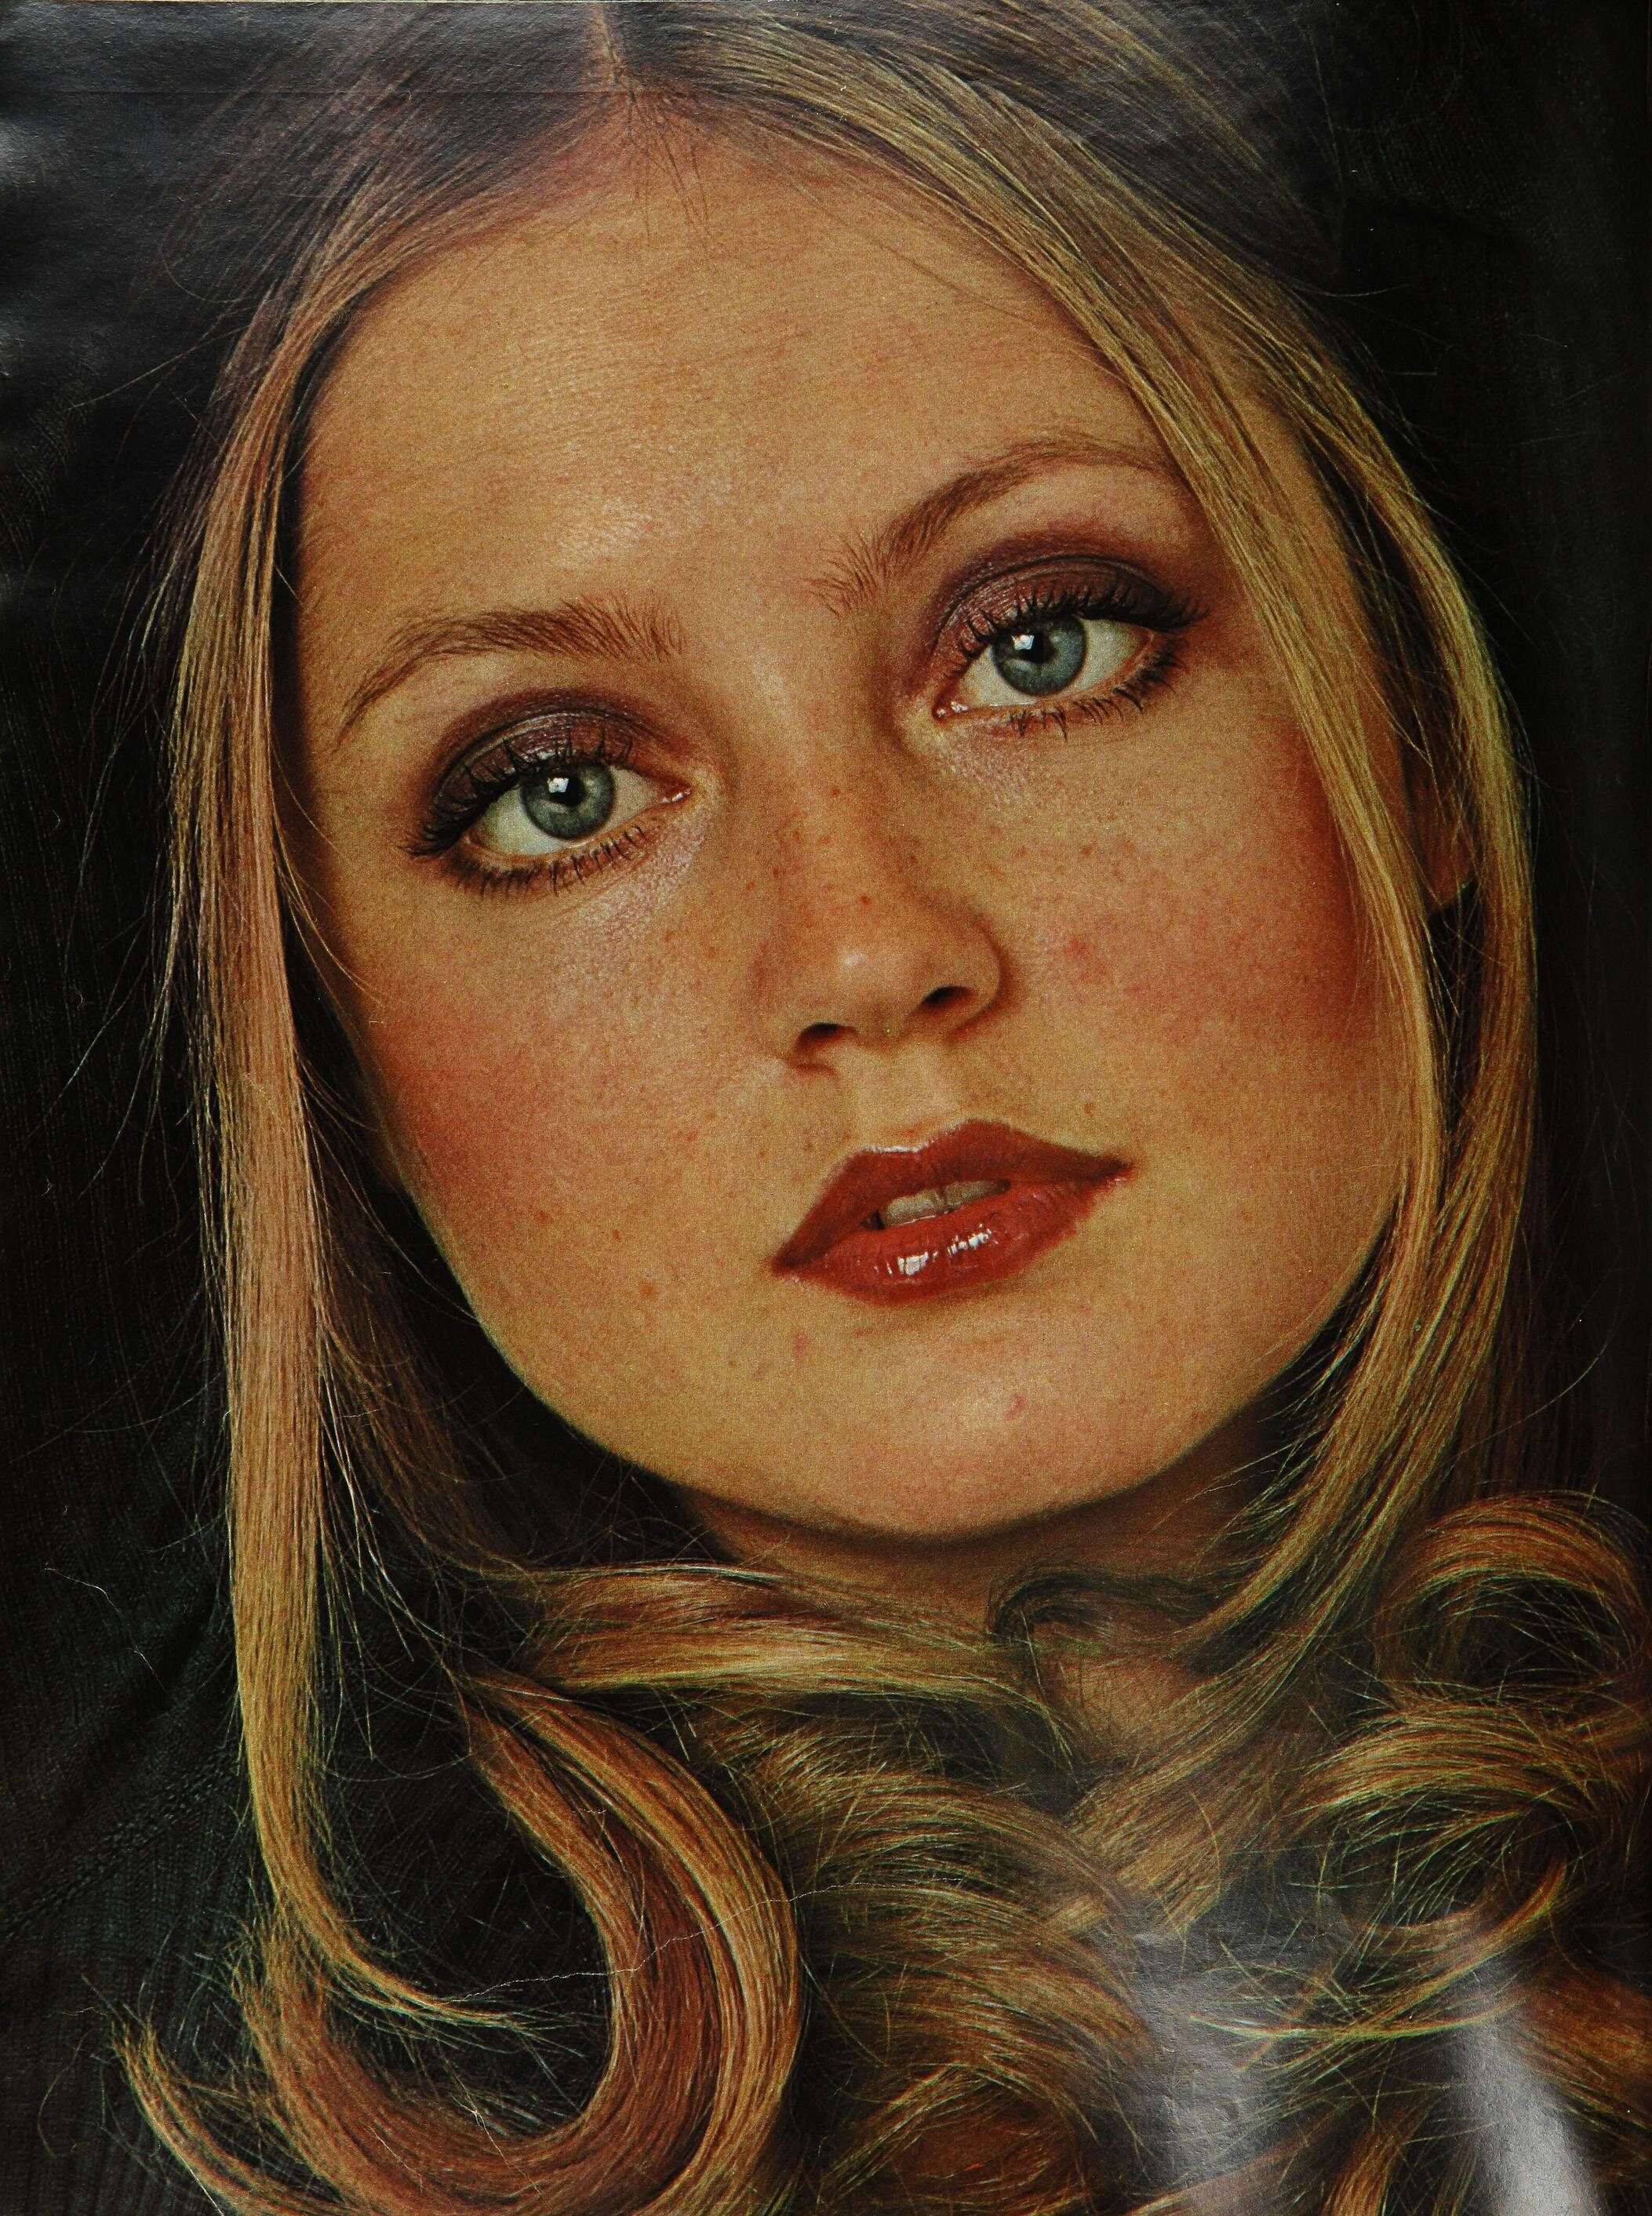 Ingrid photographed by Carmen Schiavone for Seventeen, July 1971.